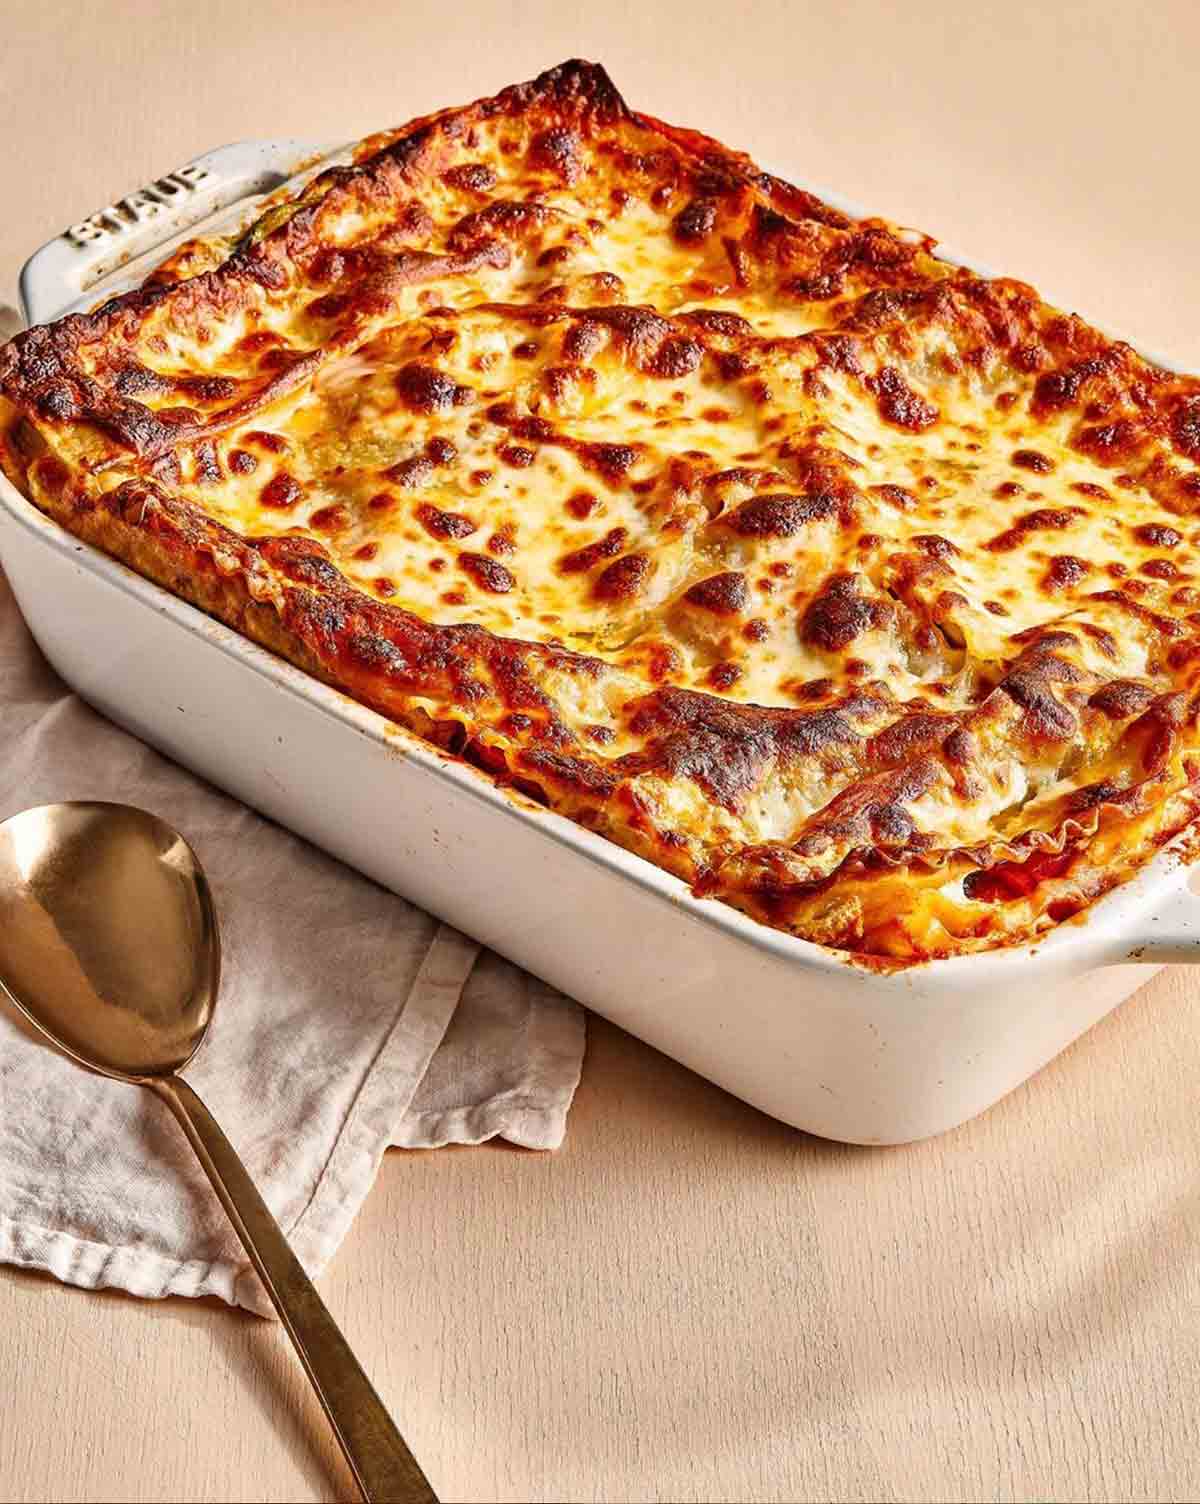 A white casserole dish filled with a cooked lasagne.